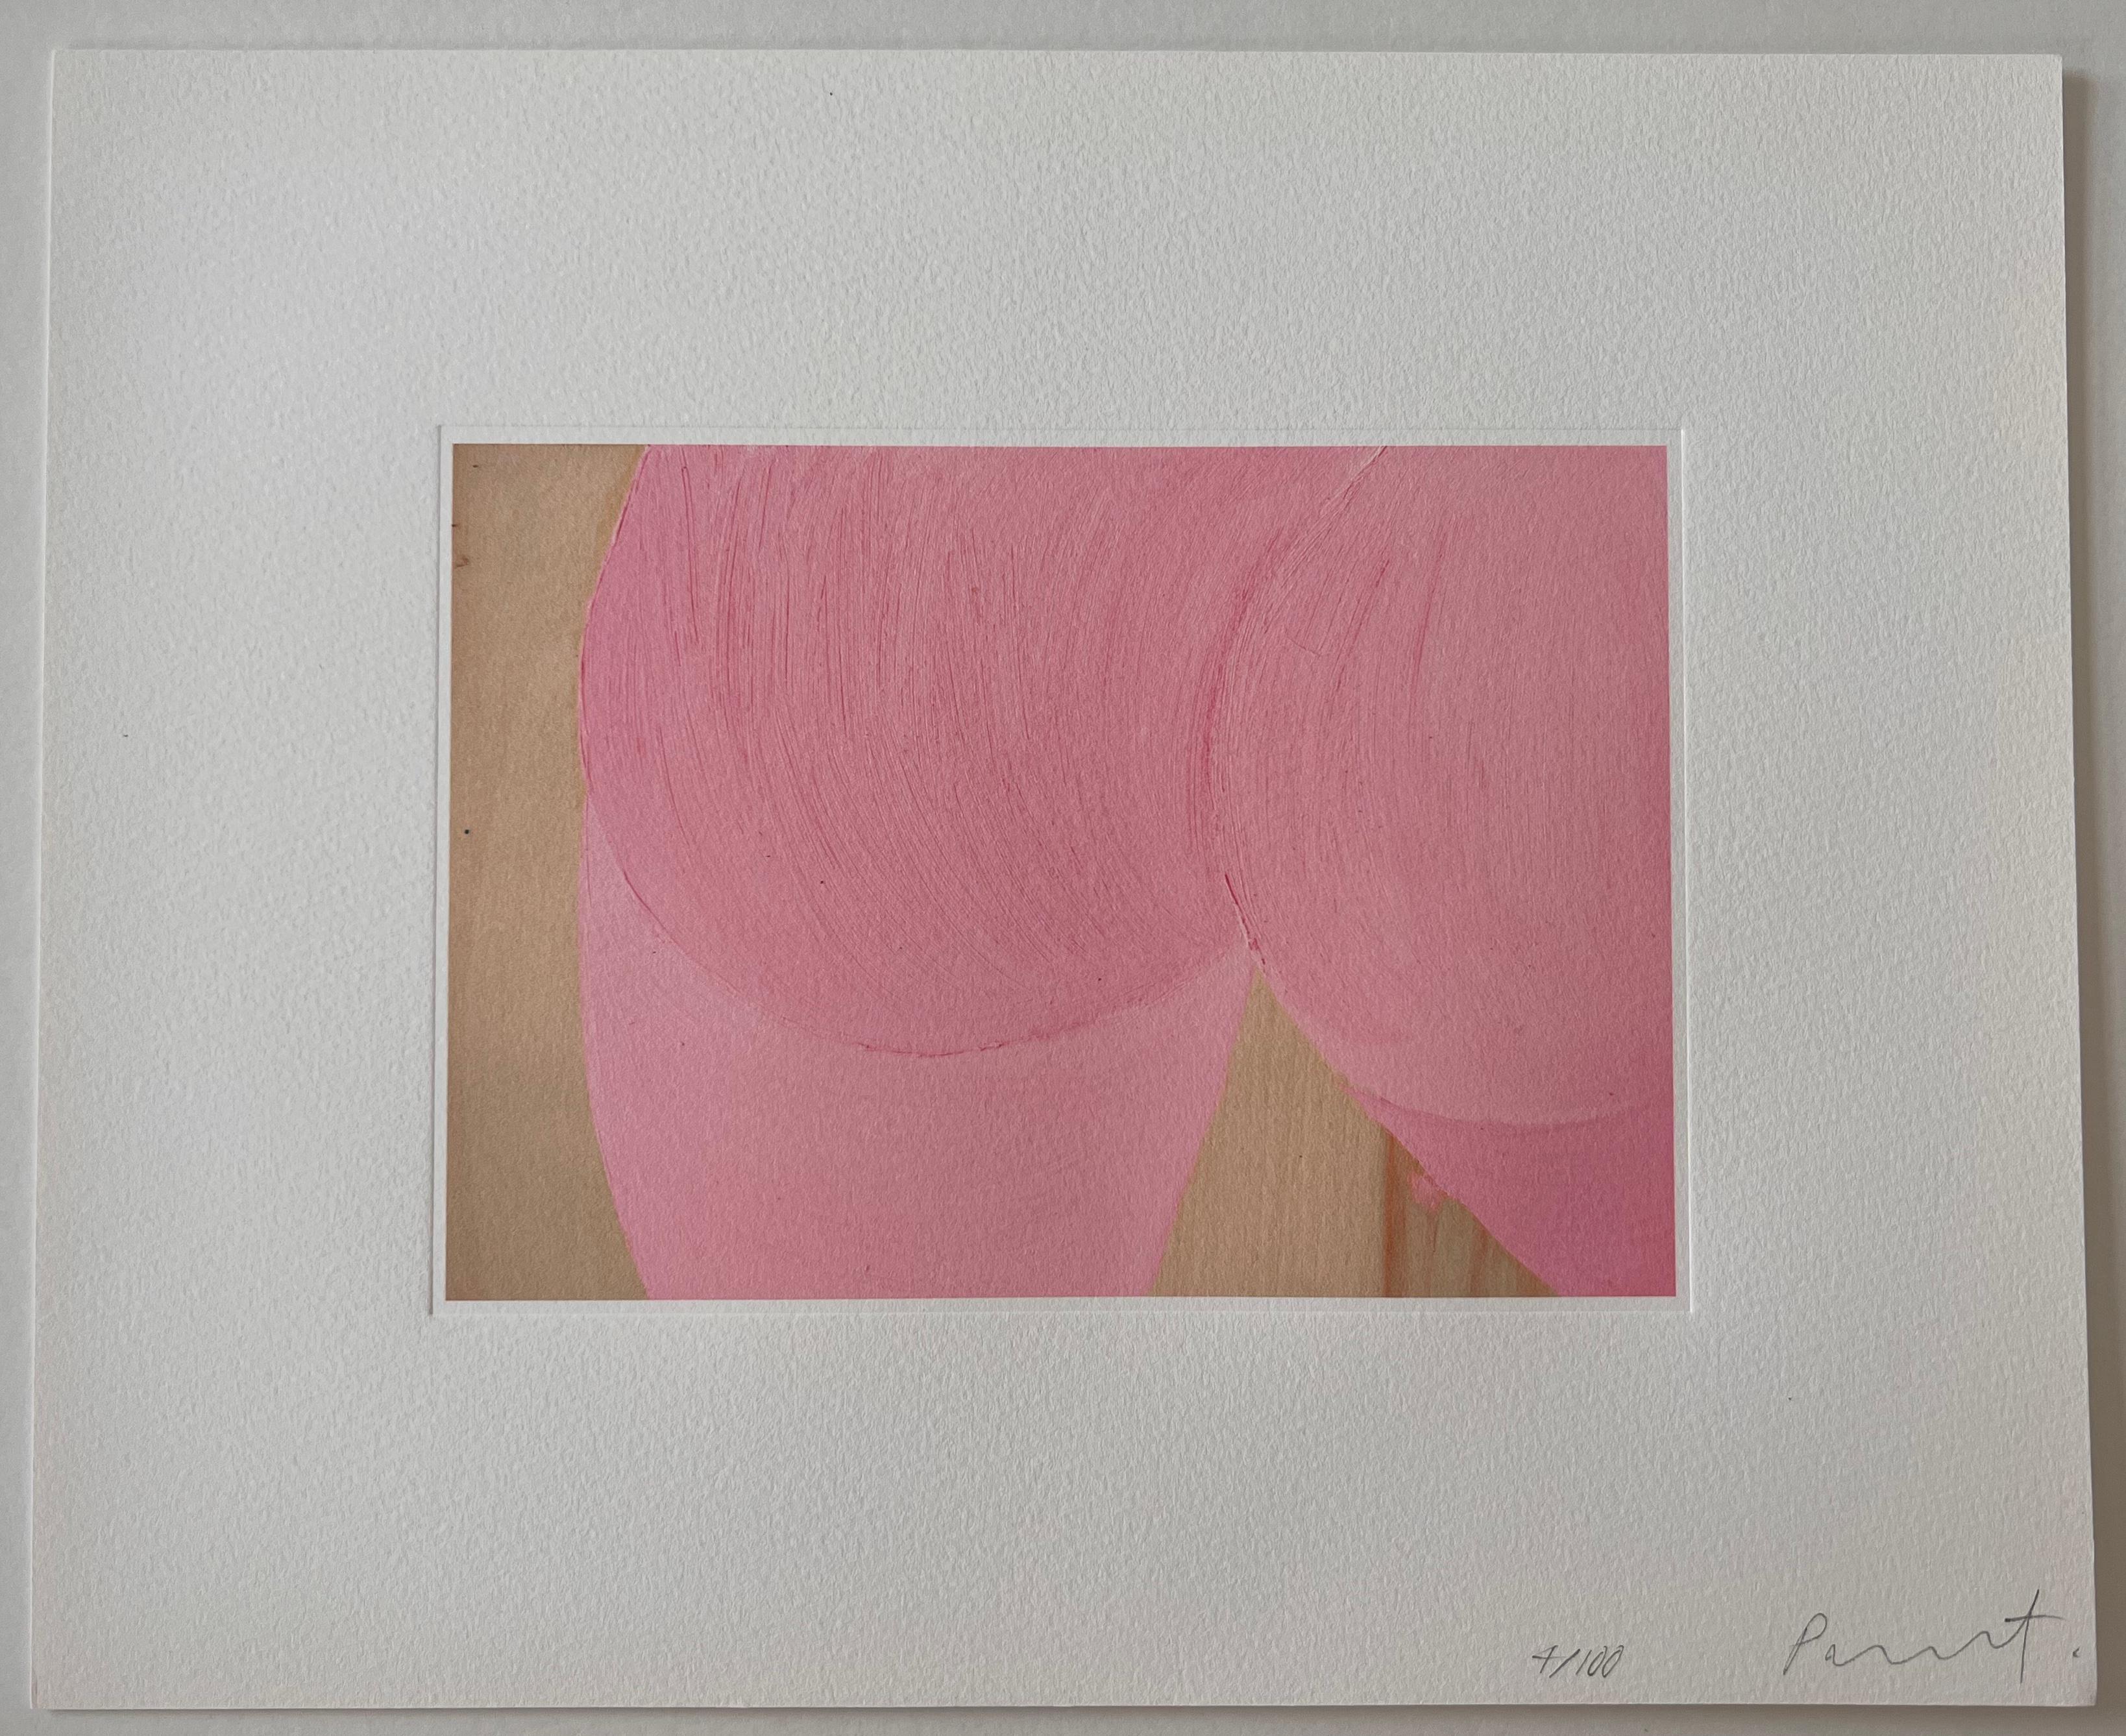 Bum Painting

digital print with embossed plate (in an oak frame)

signed and numbered (lower right)

24.5x30 CM.

Published in an edition of 100 by Studio Voltaire, London, in 2017

LAURE PROUVOST’S LIMITED EDITION PRINT FEATURES ONE OF THE